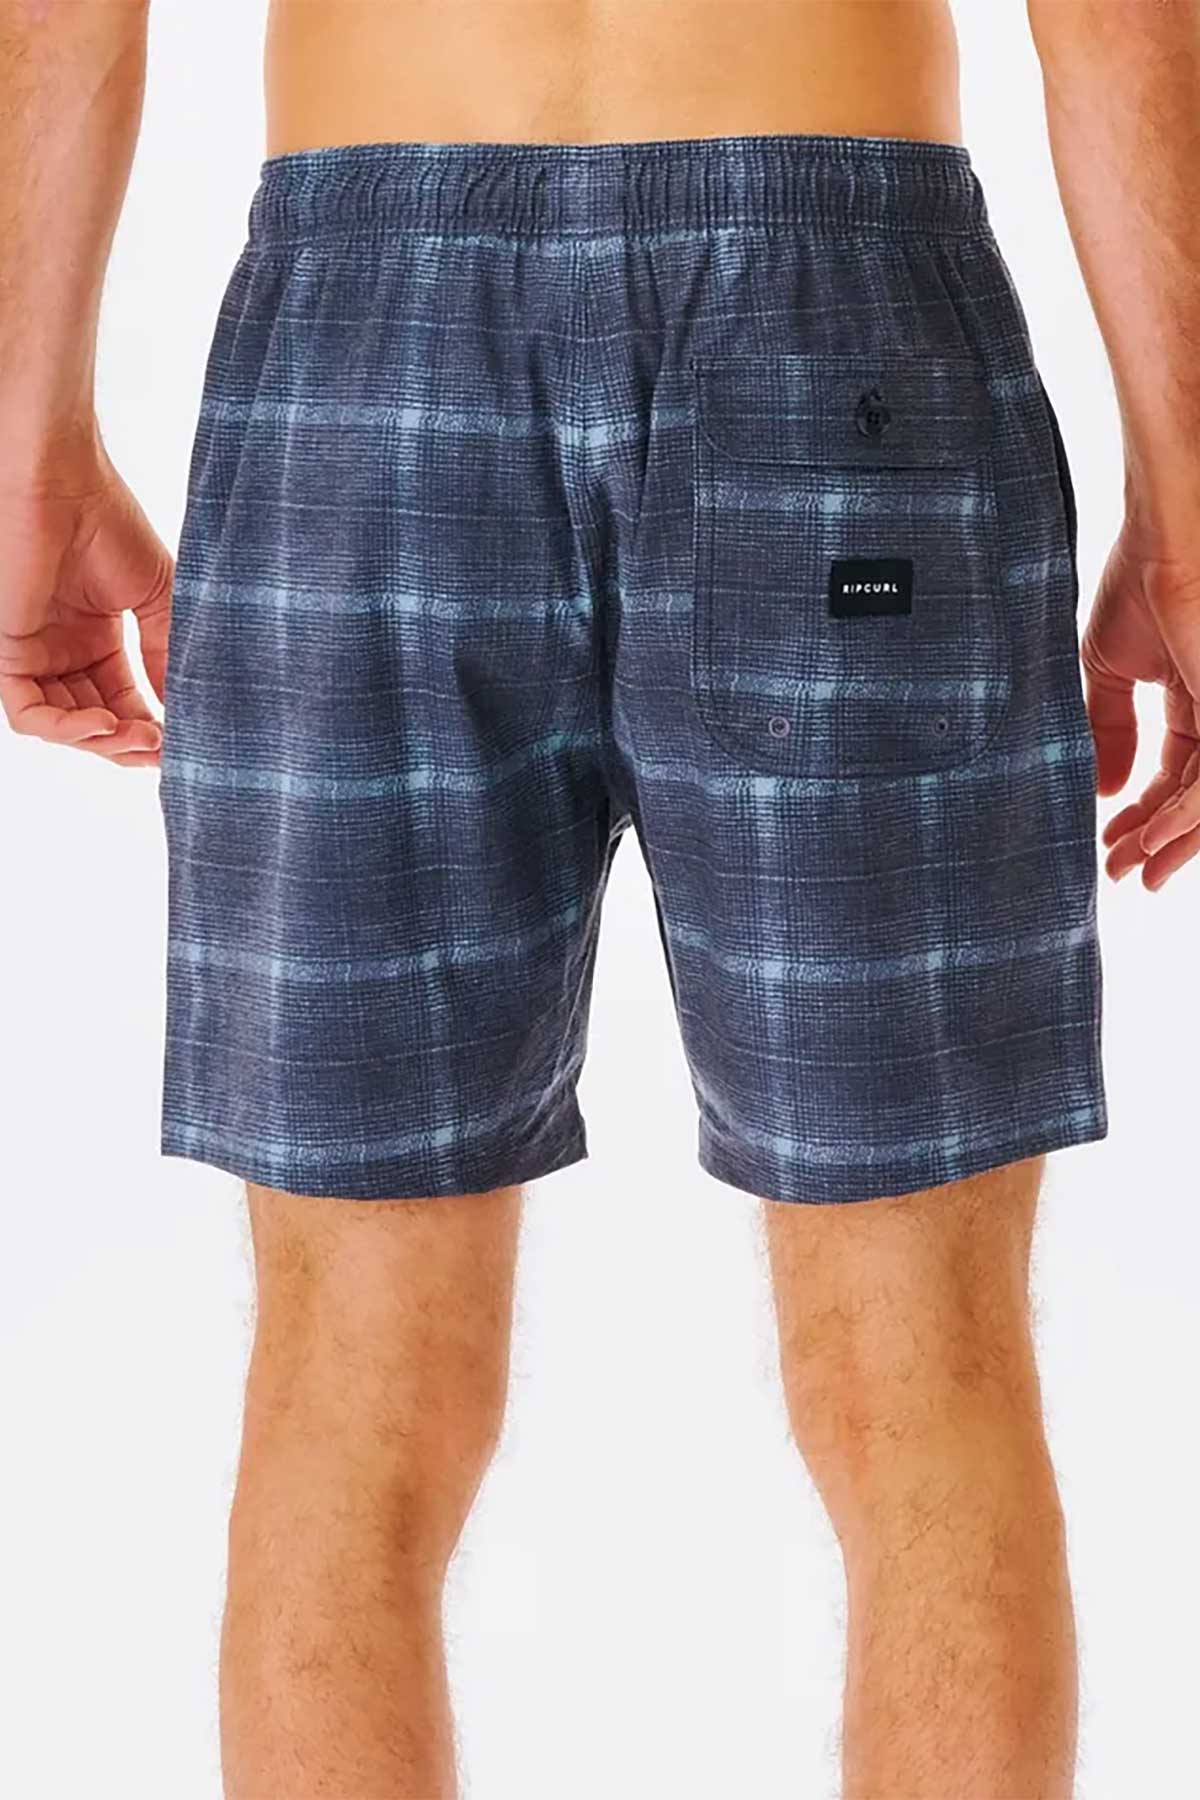 Rip Curl Shorts Newport Volley- Mineral Blue, back view of  button closure pockets. Made for in and out of the water